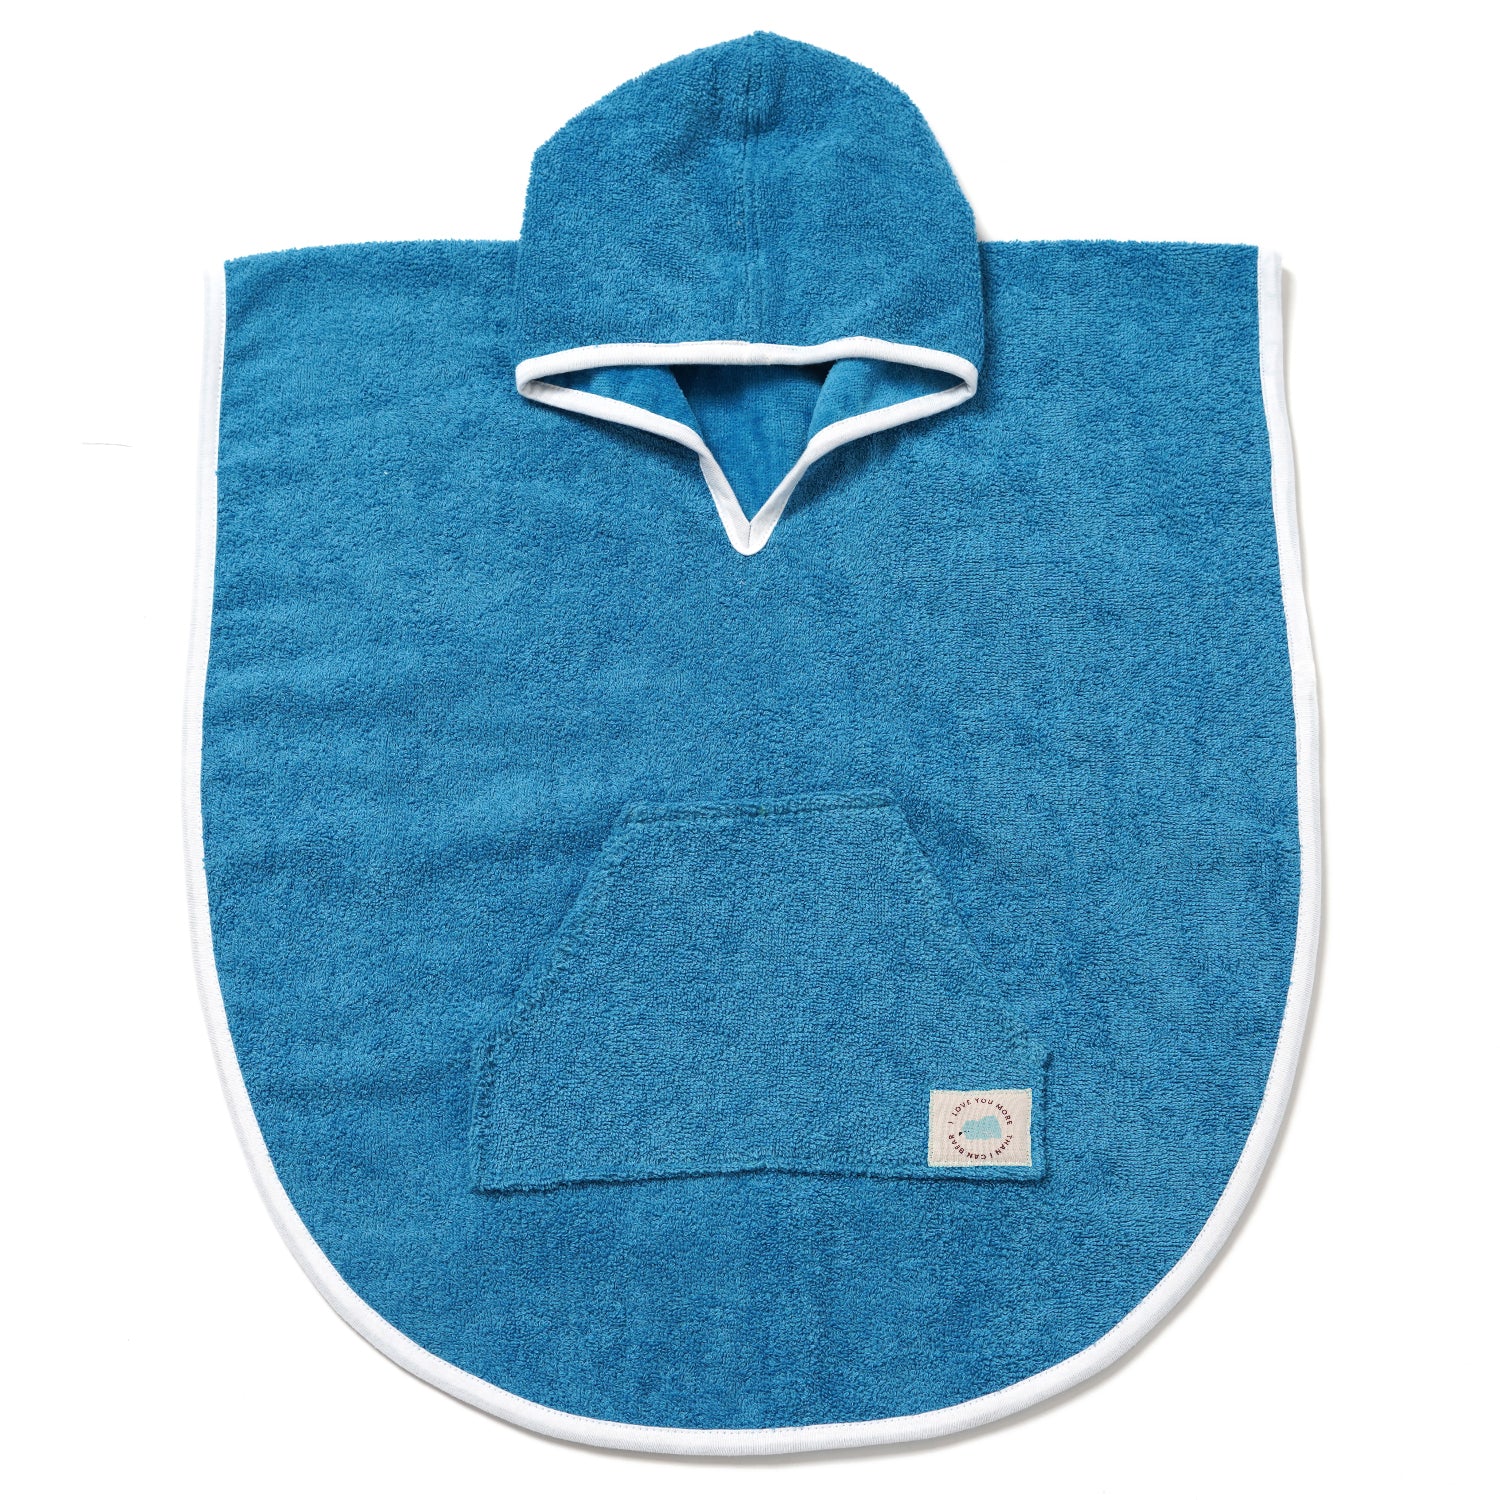 100% Cotton Woven Baby Poncho Towel Soft and Absorbent Hooded Towel (Blue)